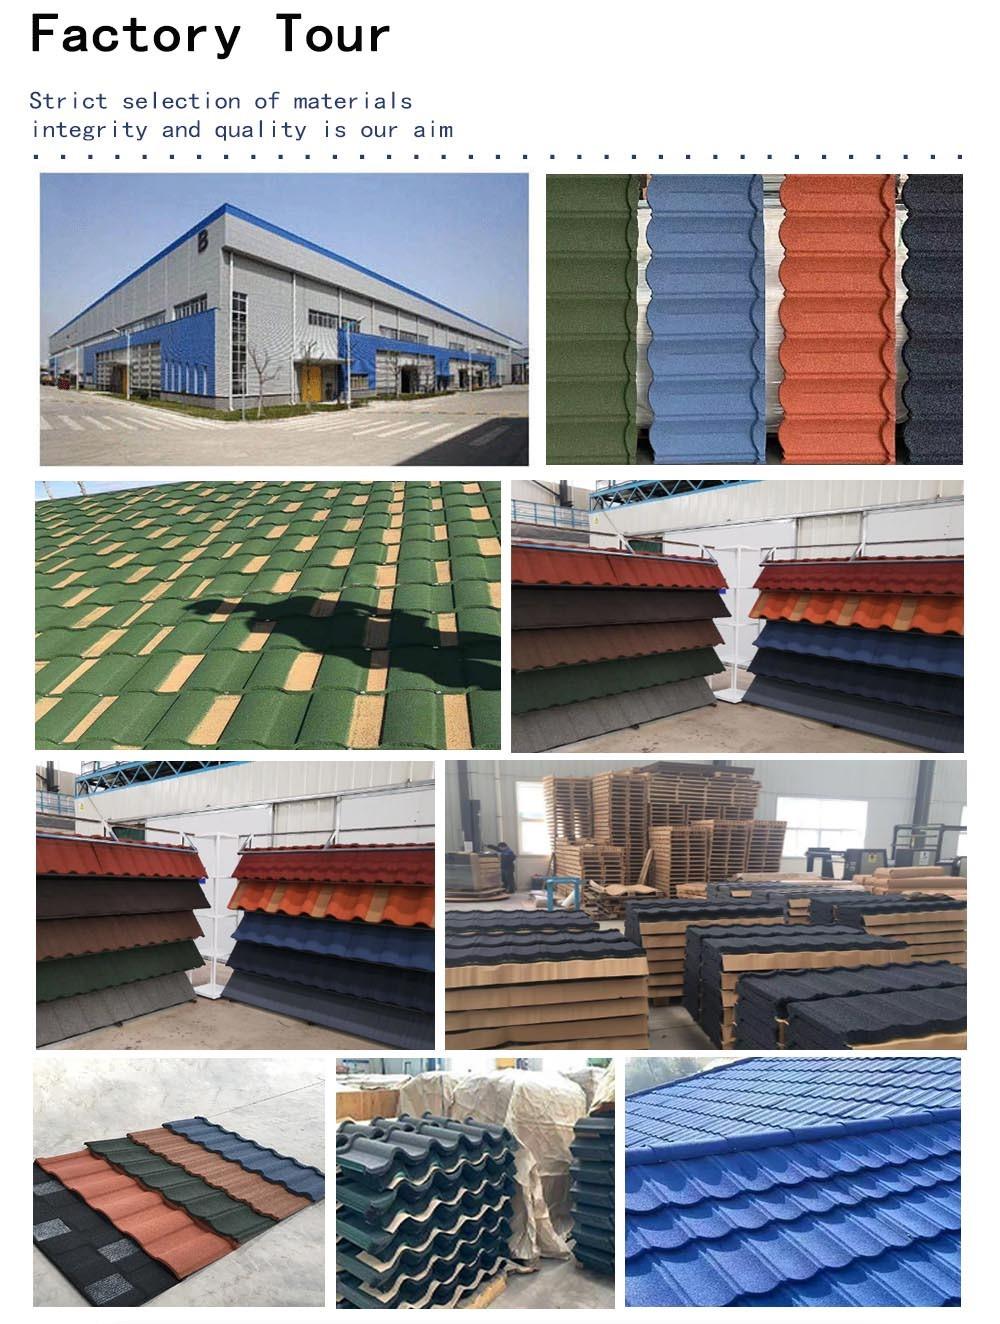 Building Material Stone Coated Chip Coated Roof Tile Stone Coated Roofing Tile Metal